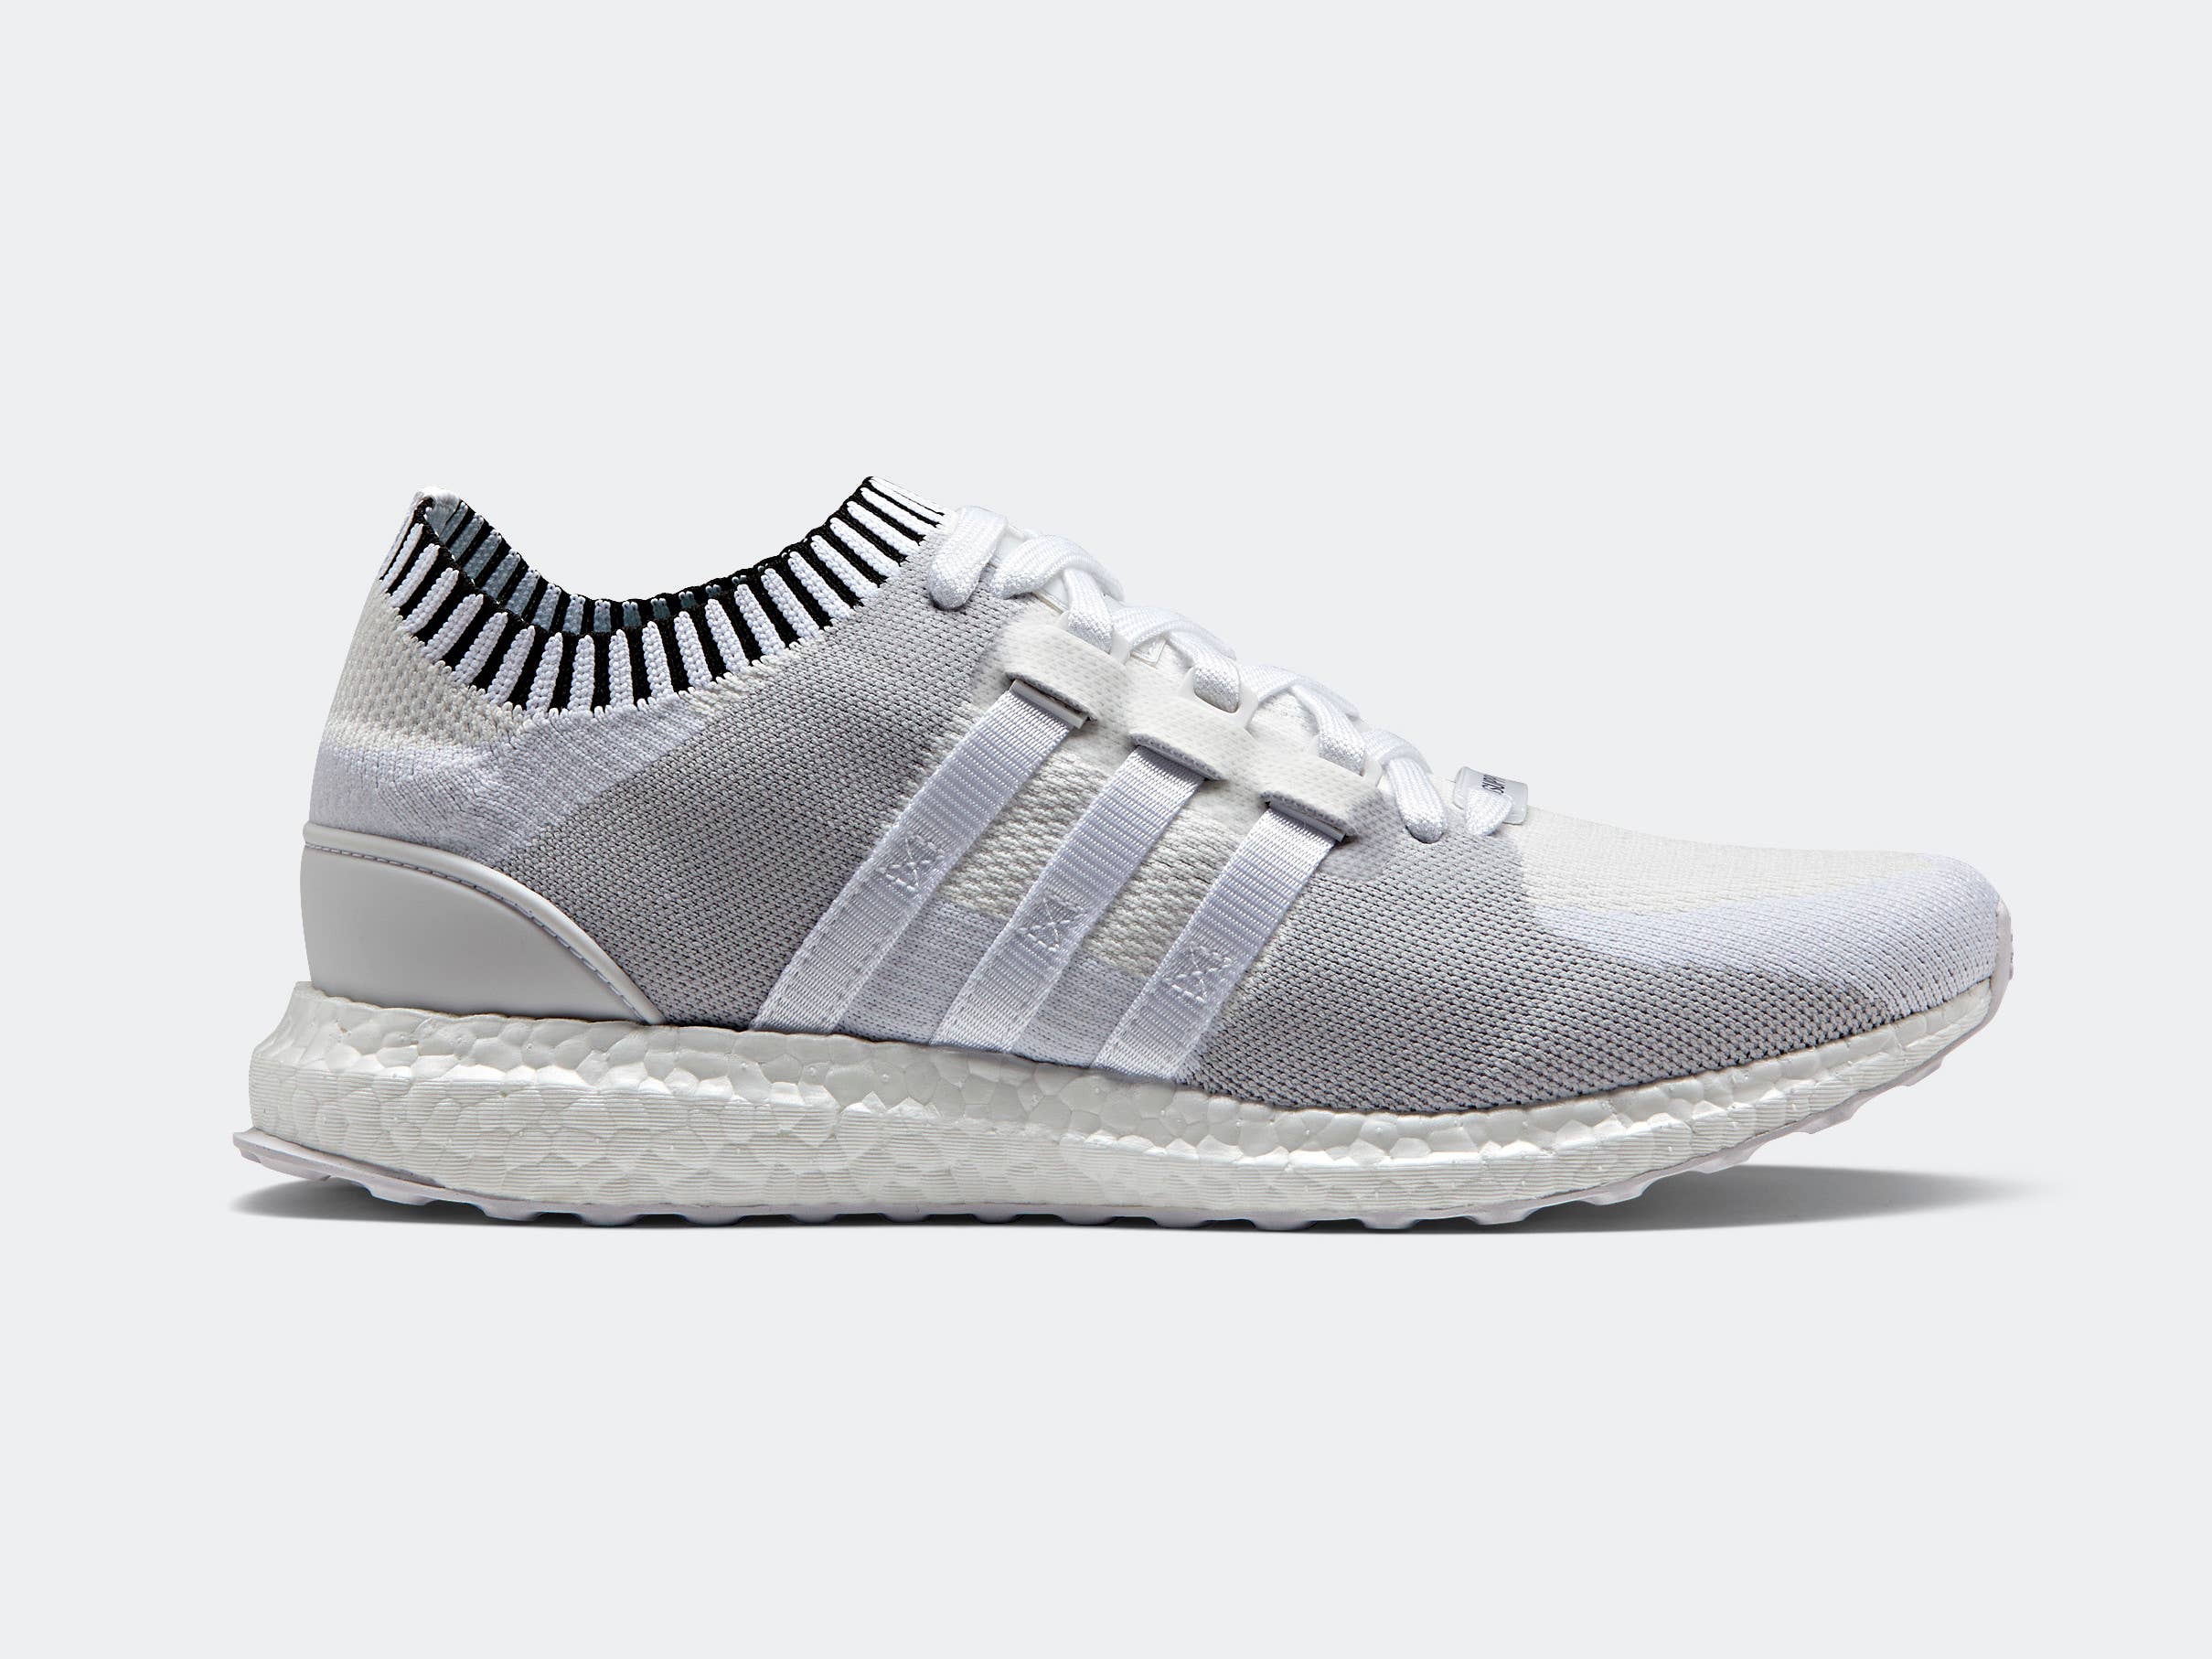 Vintage White' Adidas Support Ultras Releasing on May 1 | Complex